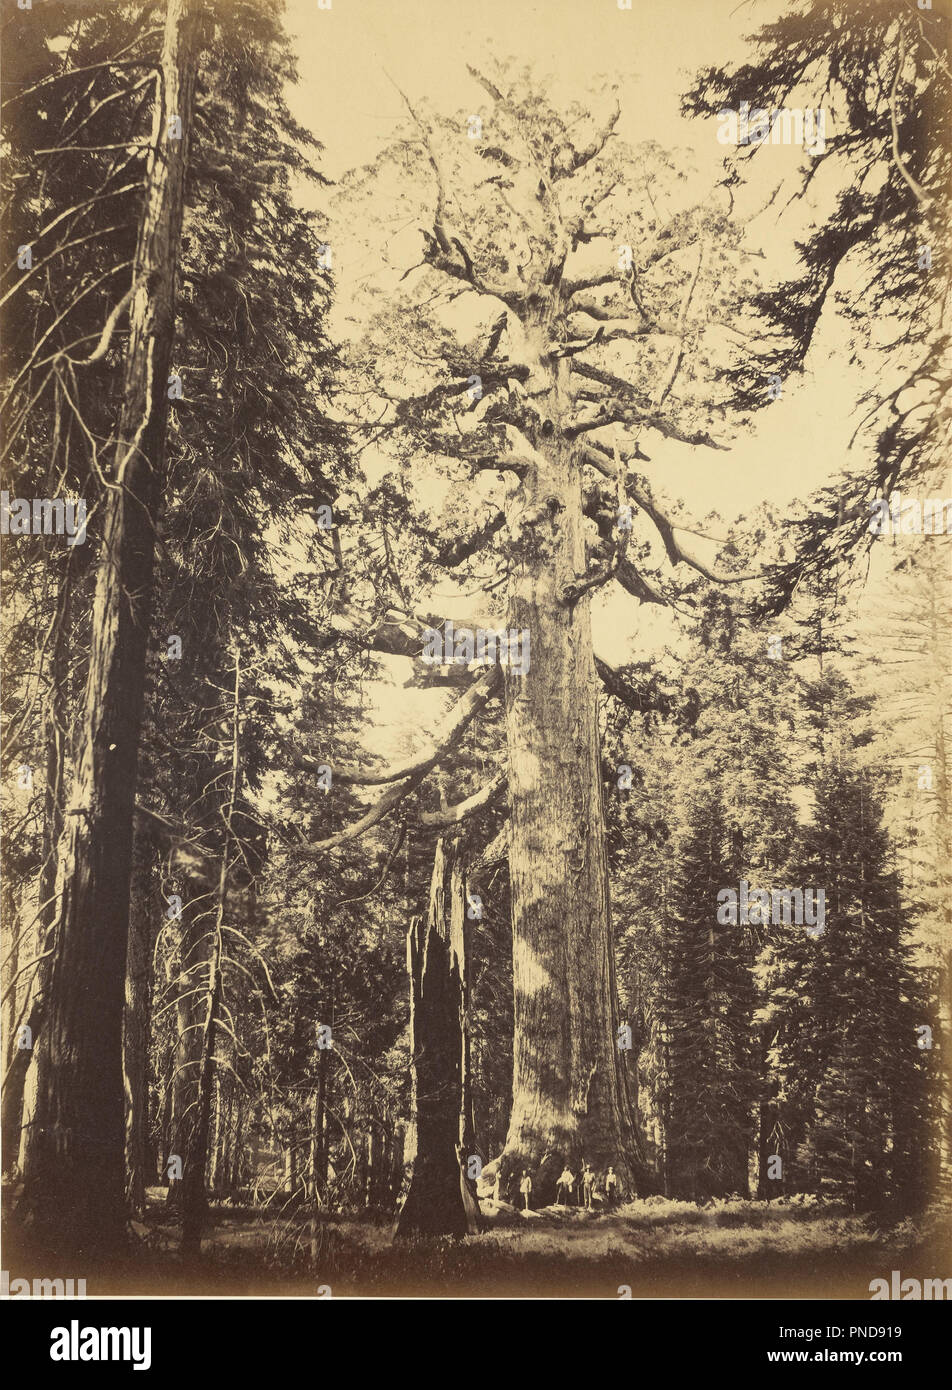 Sequoia Gigantea - 'Grizzly Giant' - Mariposa Grove. Date/Period: Negative 1861; print ca. 1866. Print. Albumen silver. Height: 521 mm (20.51 in); Width: 381 mm (15 in). Author: Carleton Watkins. Stock Photo